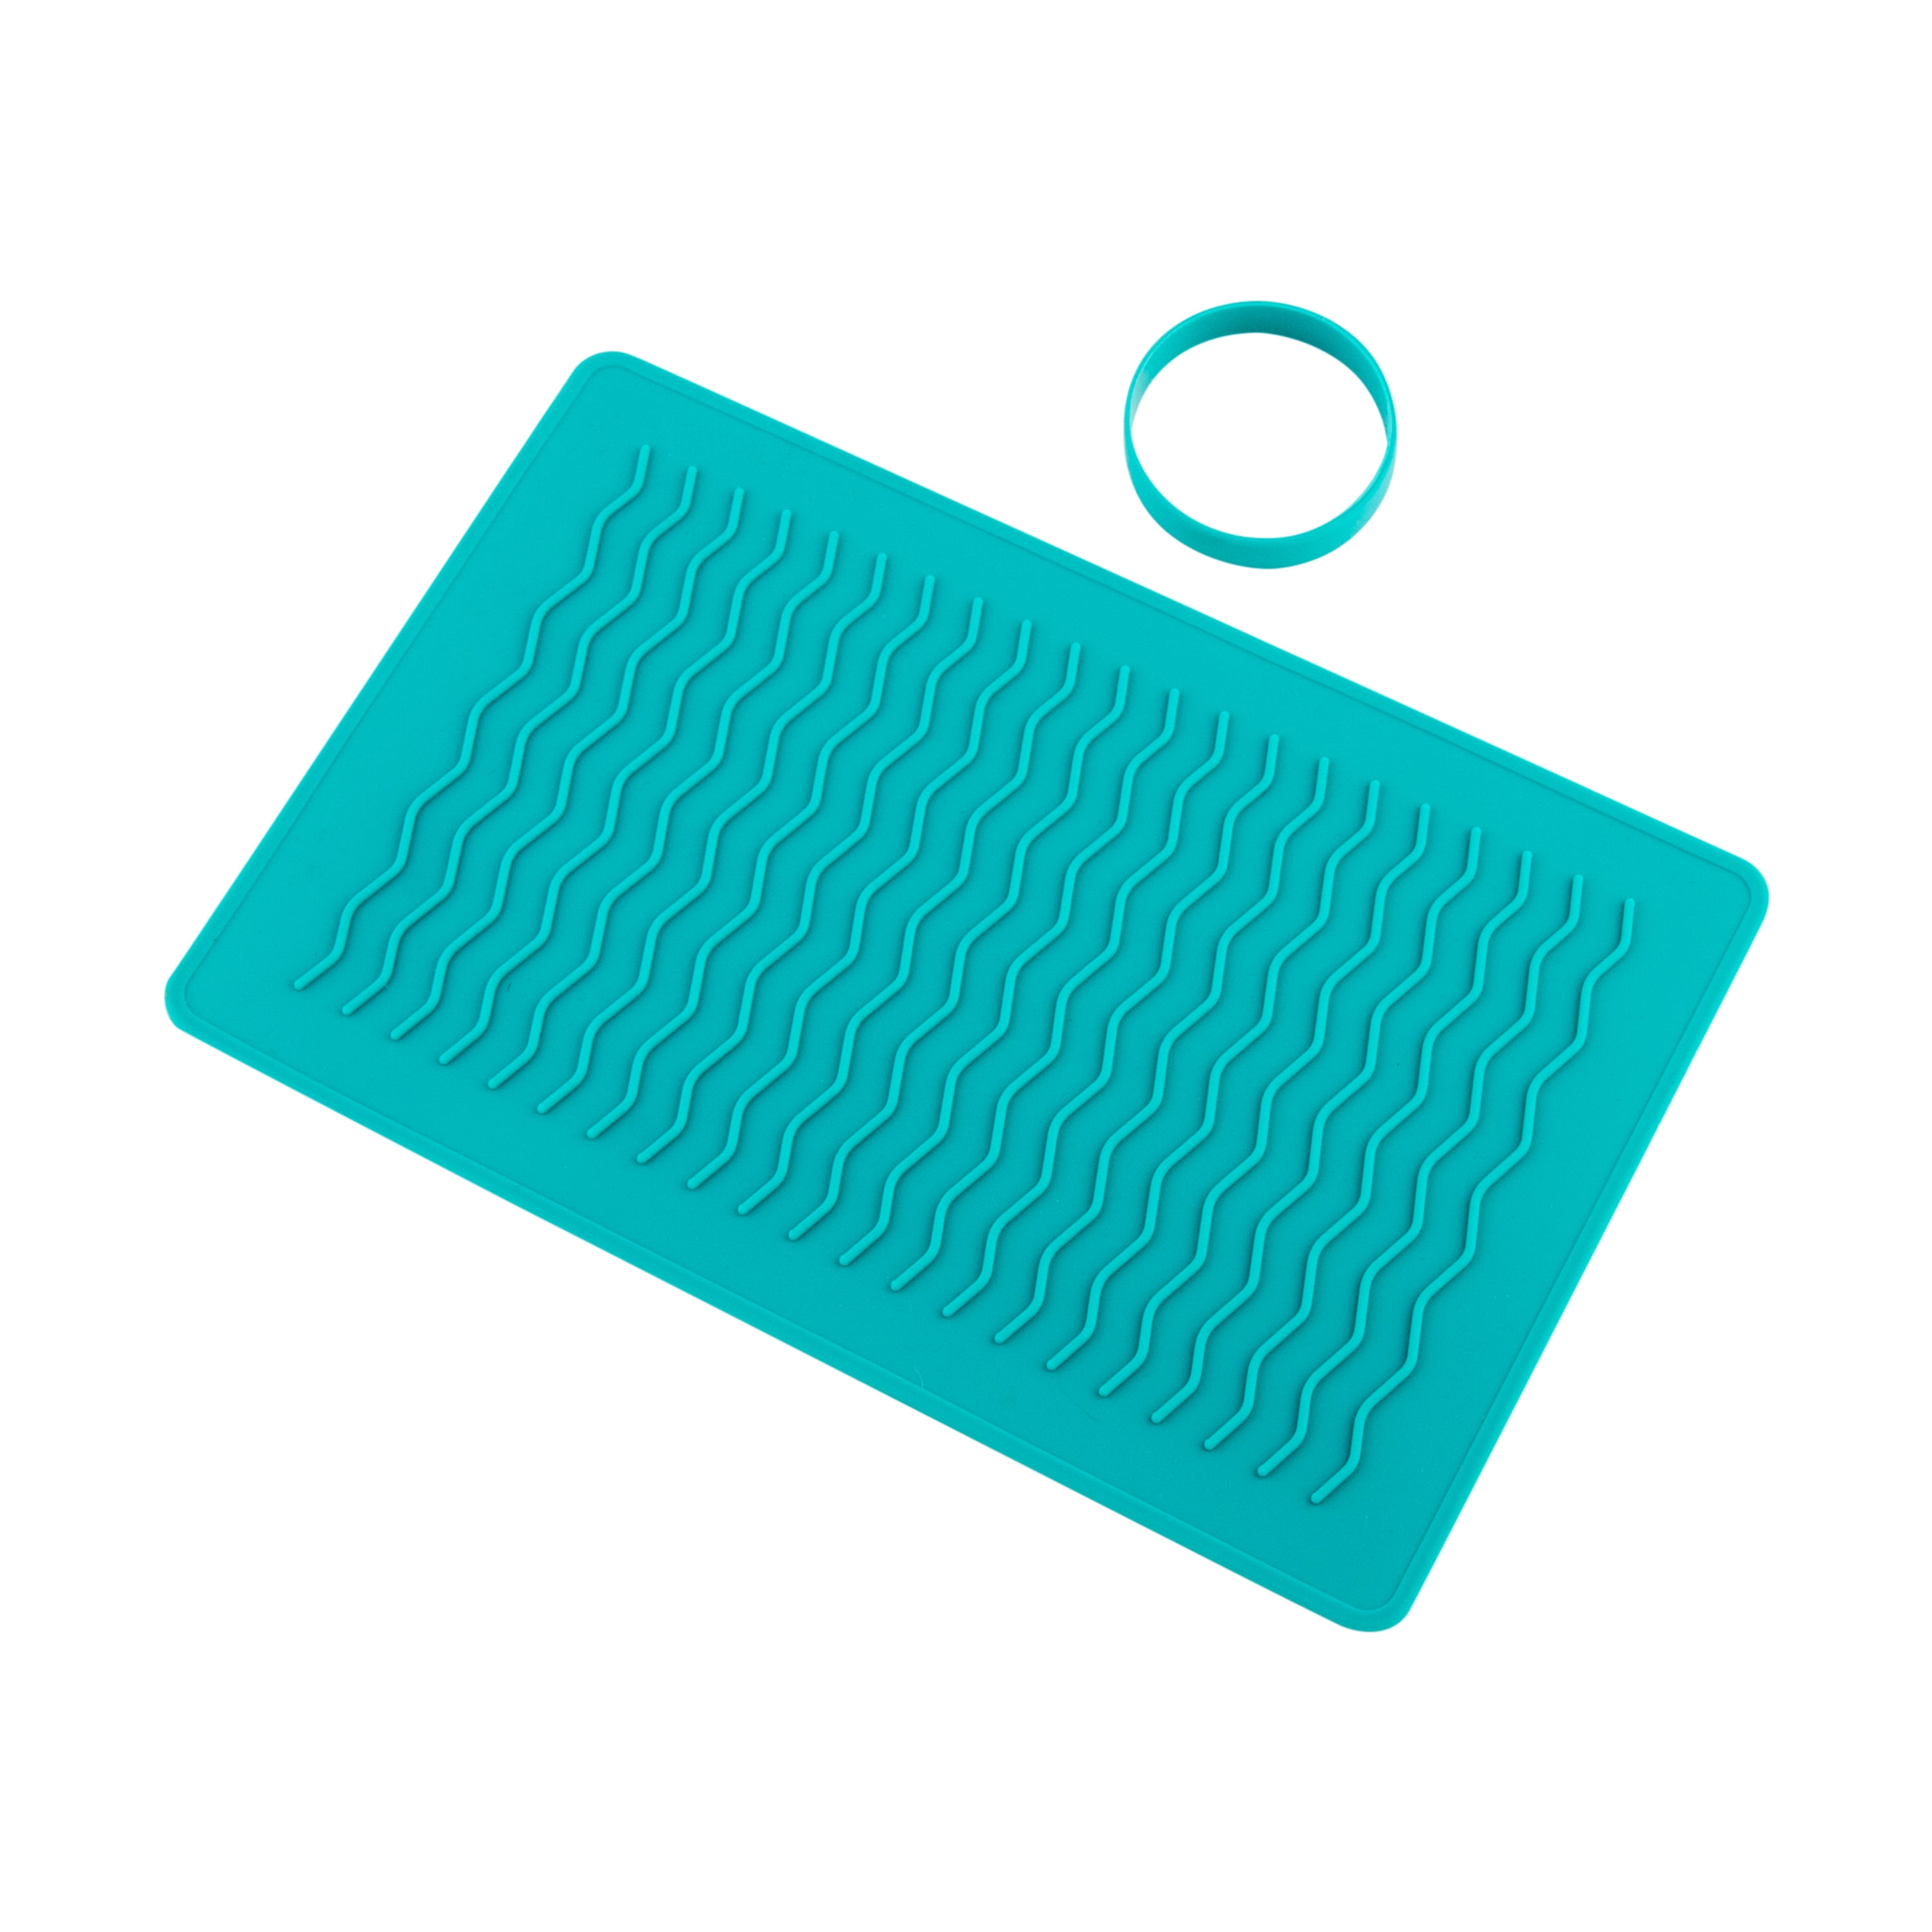 Mainstays Silicone Iron Rest Mat in Teal